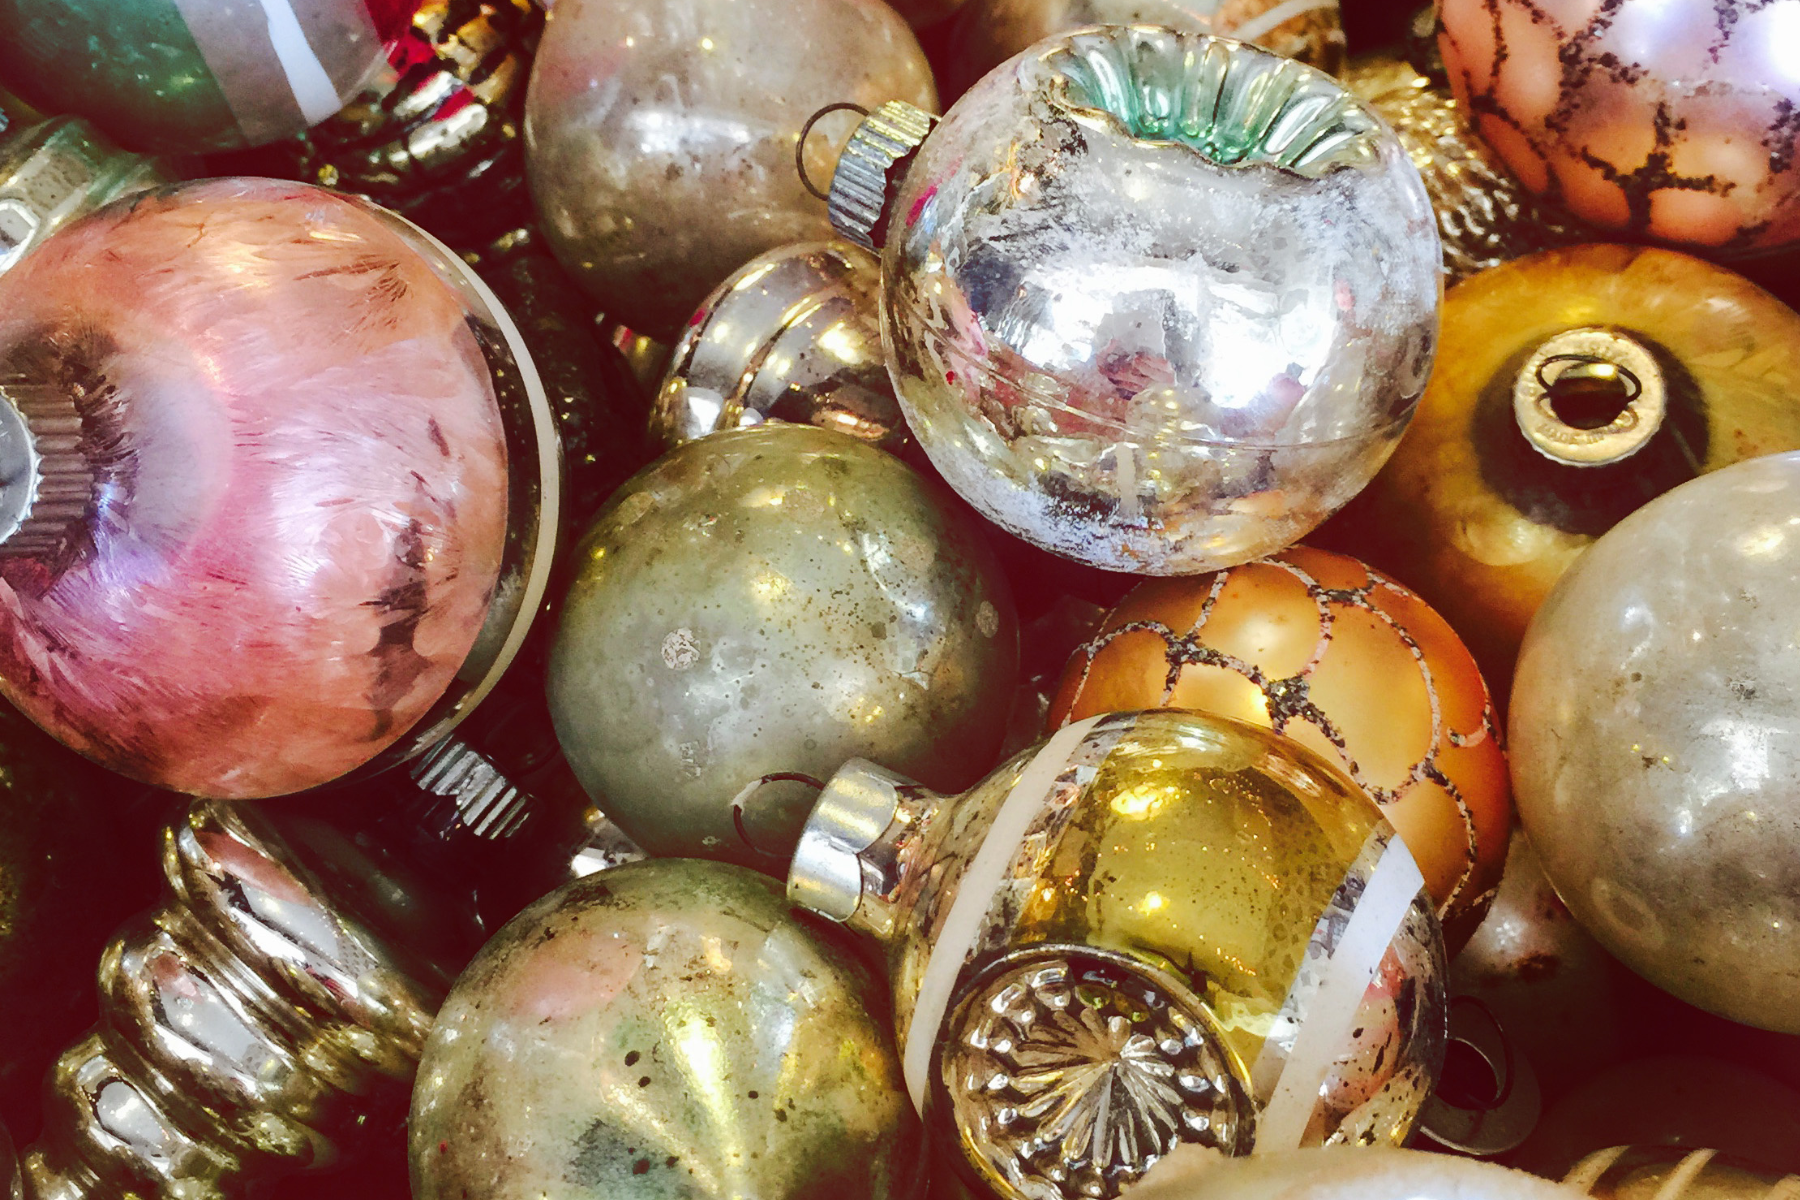 Valuable Vintage Christmas Ornaments and Collectibles to Look for in Antique  Shops and Attics